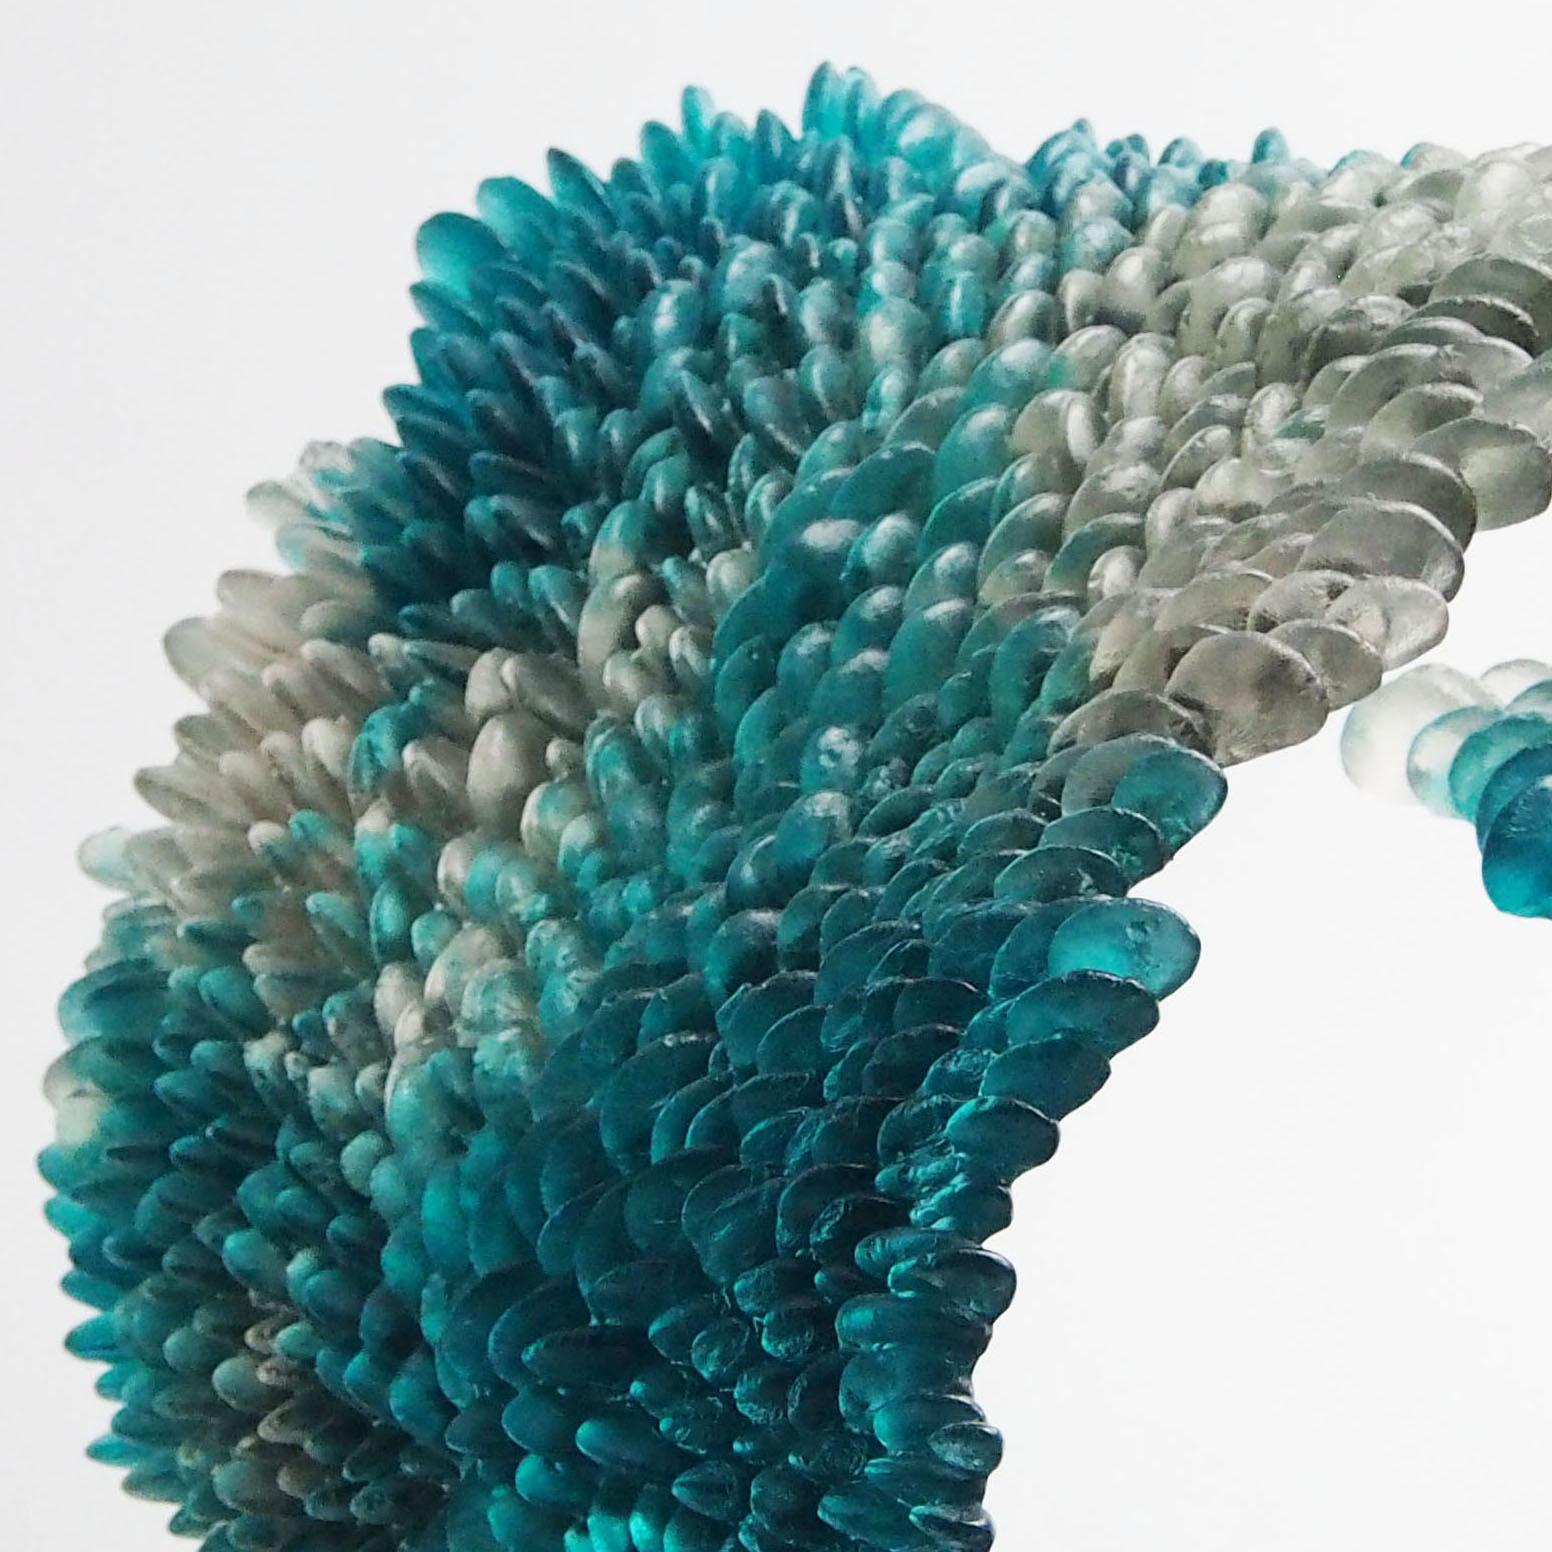 Alliform II, a Unique Glass Sculpture in Clear and Teal by Nina Casson McGarva 1